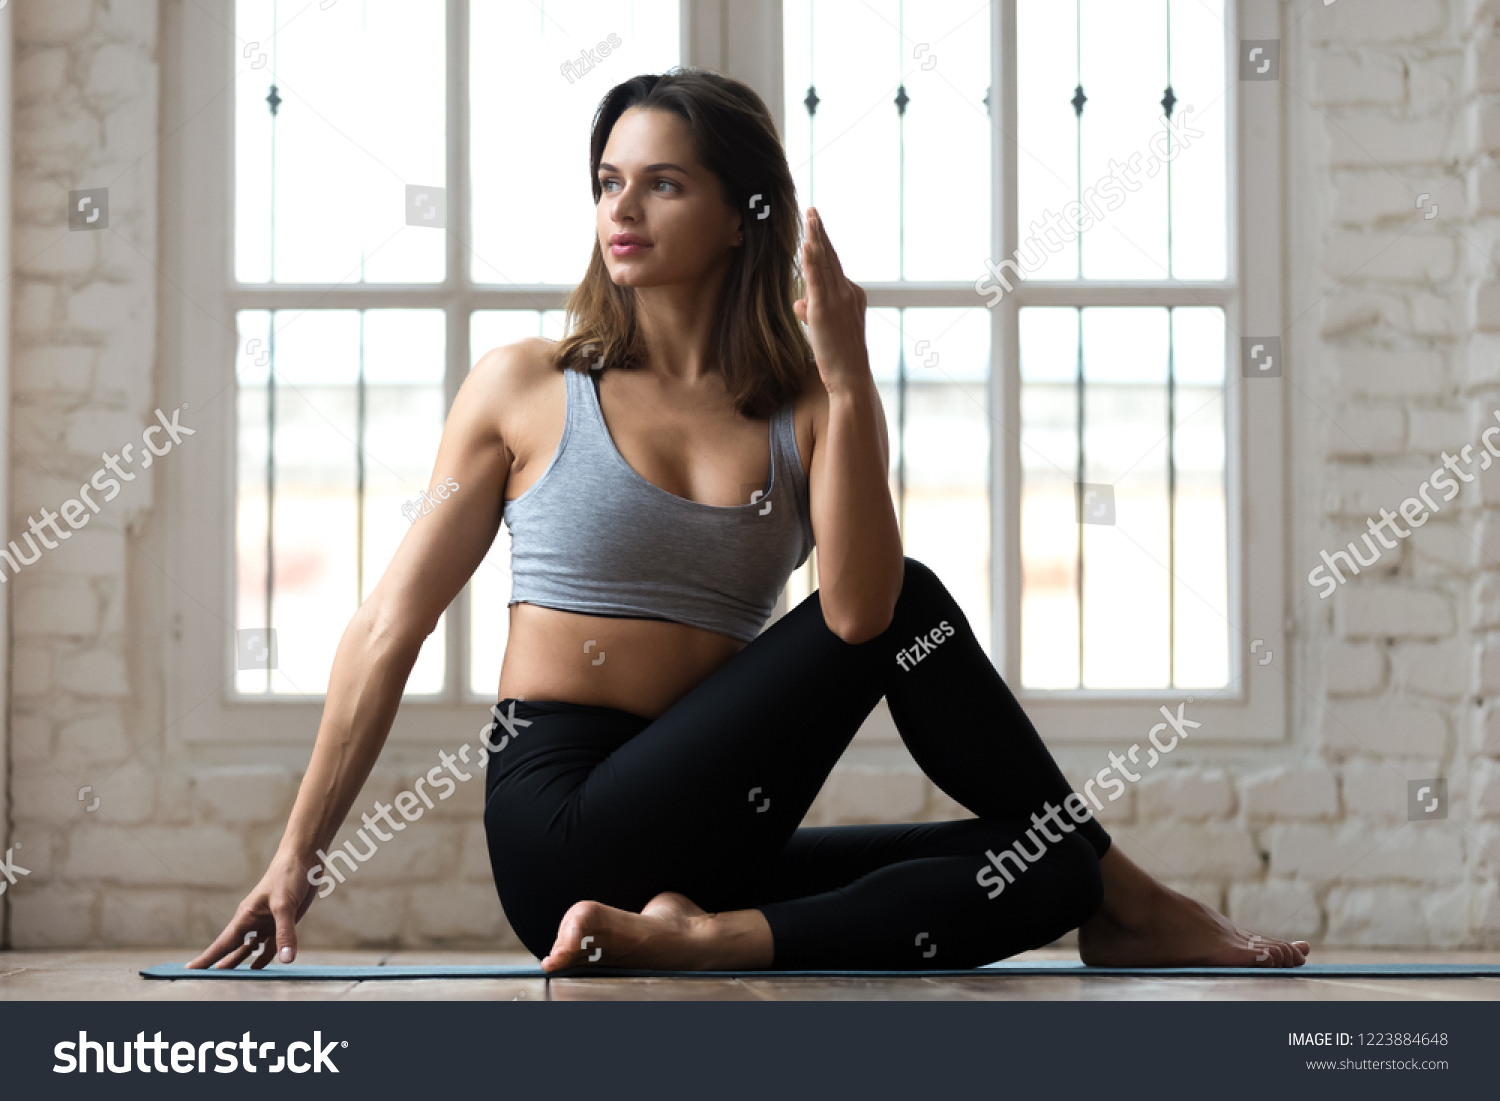 Young sporty attractive woman practicing yoga, doing Half lord of the fishes exercise, Ardha Matsyendrasana pose, working out, wearing sportswear, pants and top, indoor full length, white yoga studio #1223884648